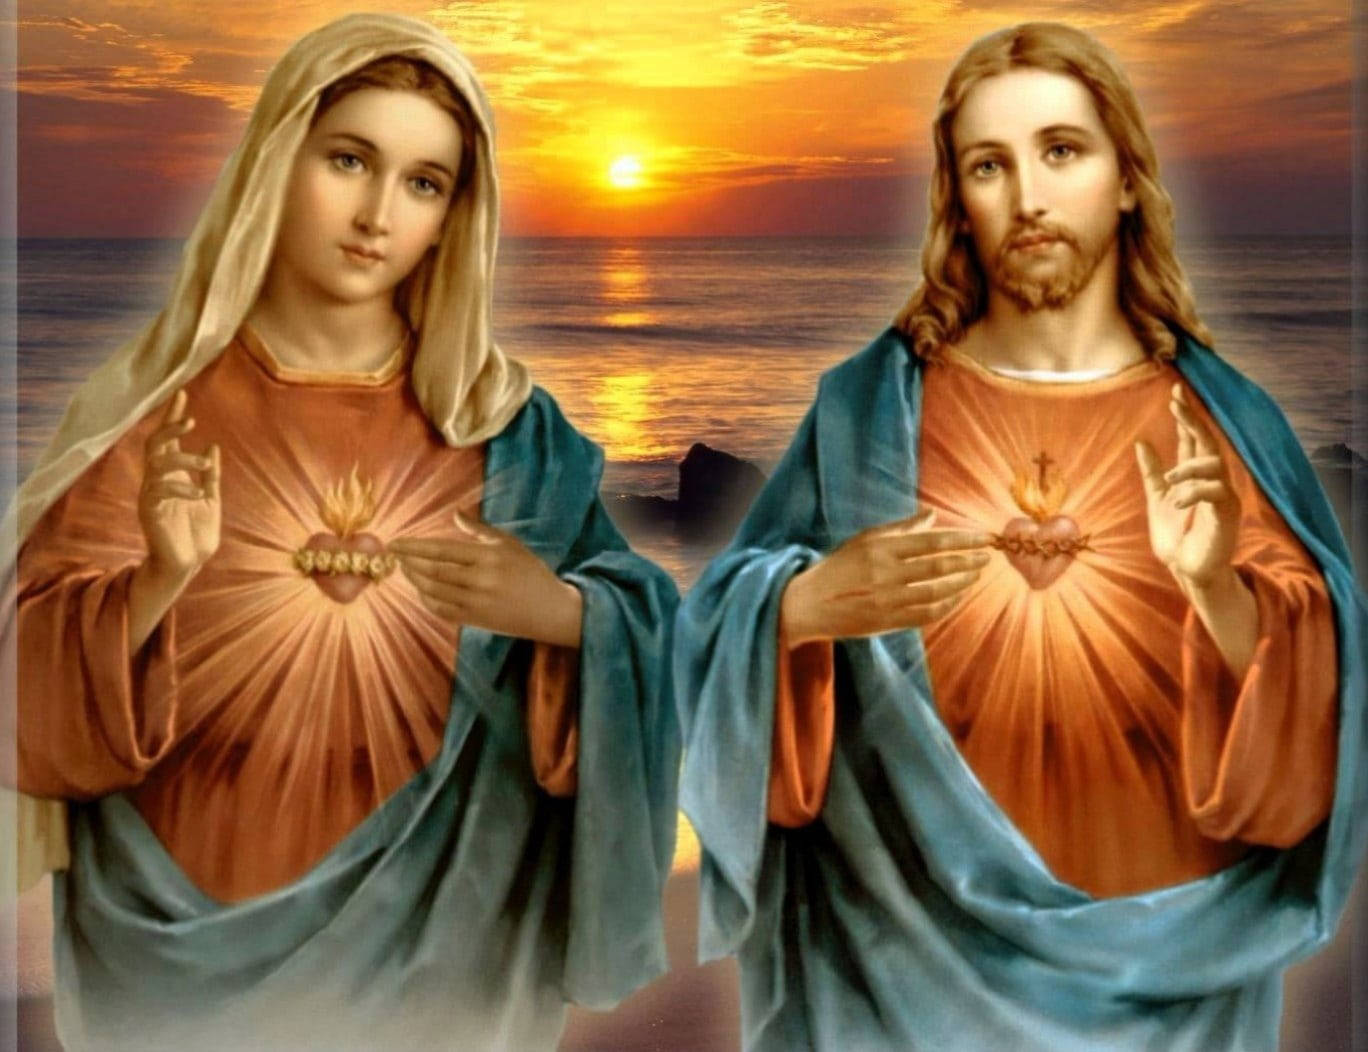 Free Mary And Jesus Wallpaper Downloads, [100+] Mary And Jesus Wallpapers  for FREE 